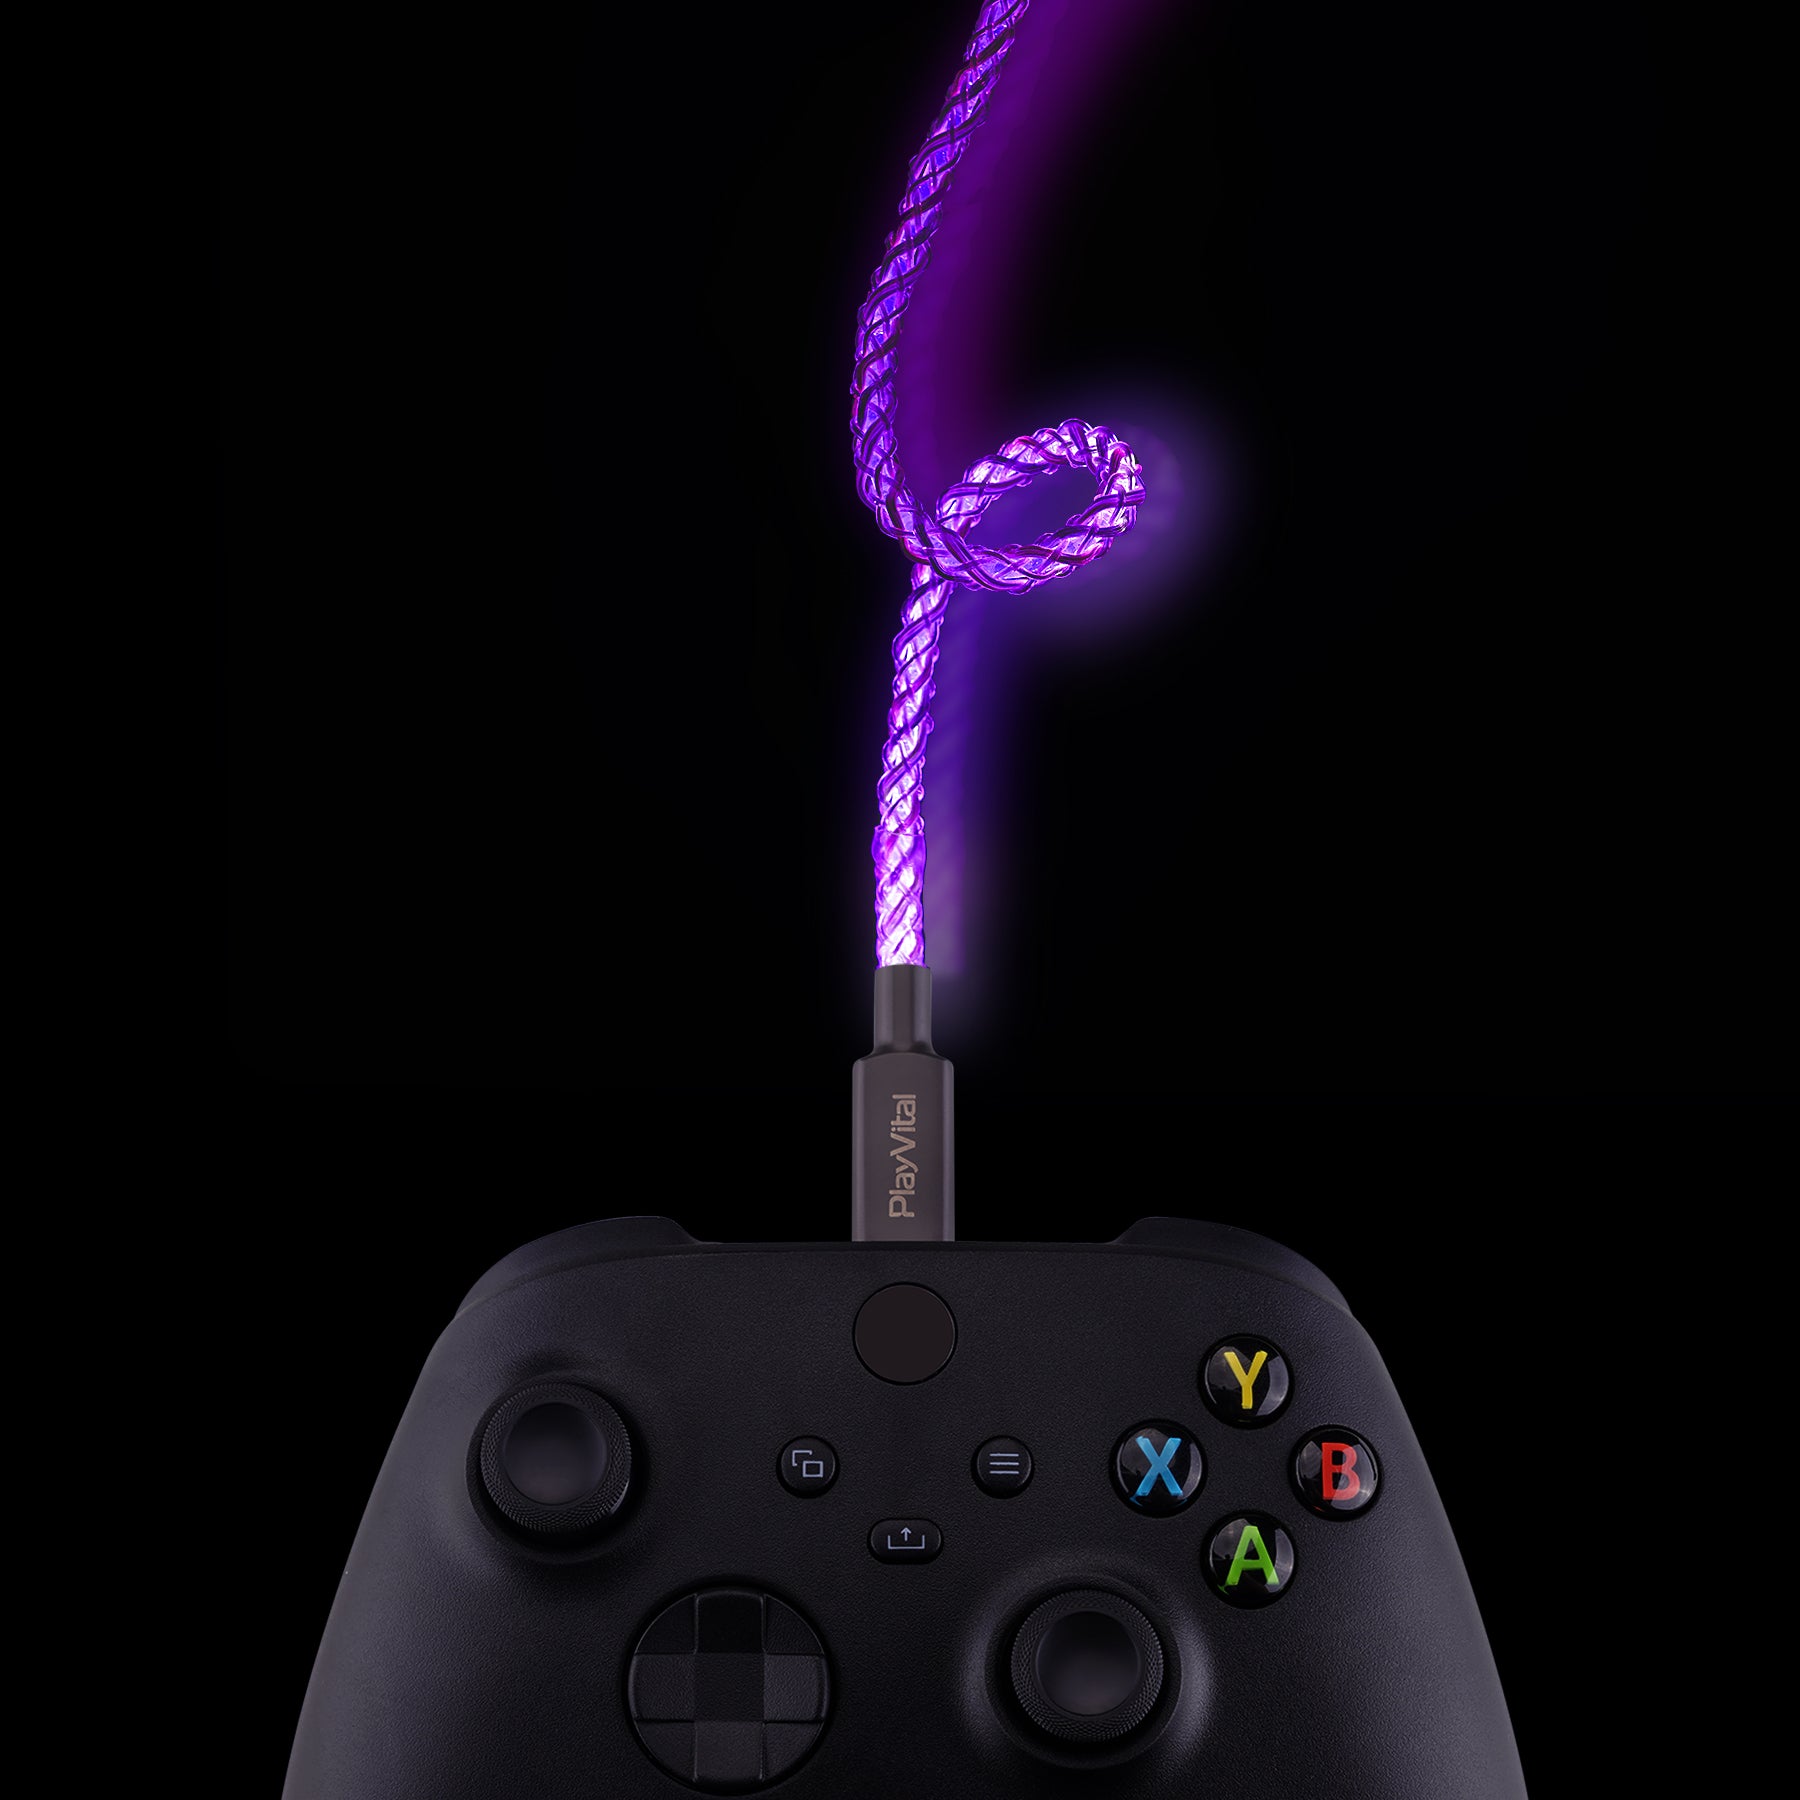 playvital 3.28FT Illuminated Charging Cable for ps5 Controller, USB Type C Charging Cord for Gamepad, Universal LED Light Up Data Cord for Xbox Core/Elite Series 2 / Switch Pro Controller- PFLED10 PlayVital